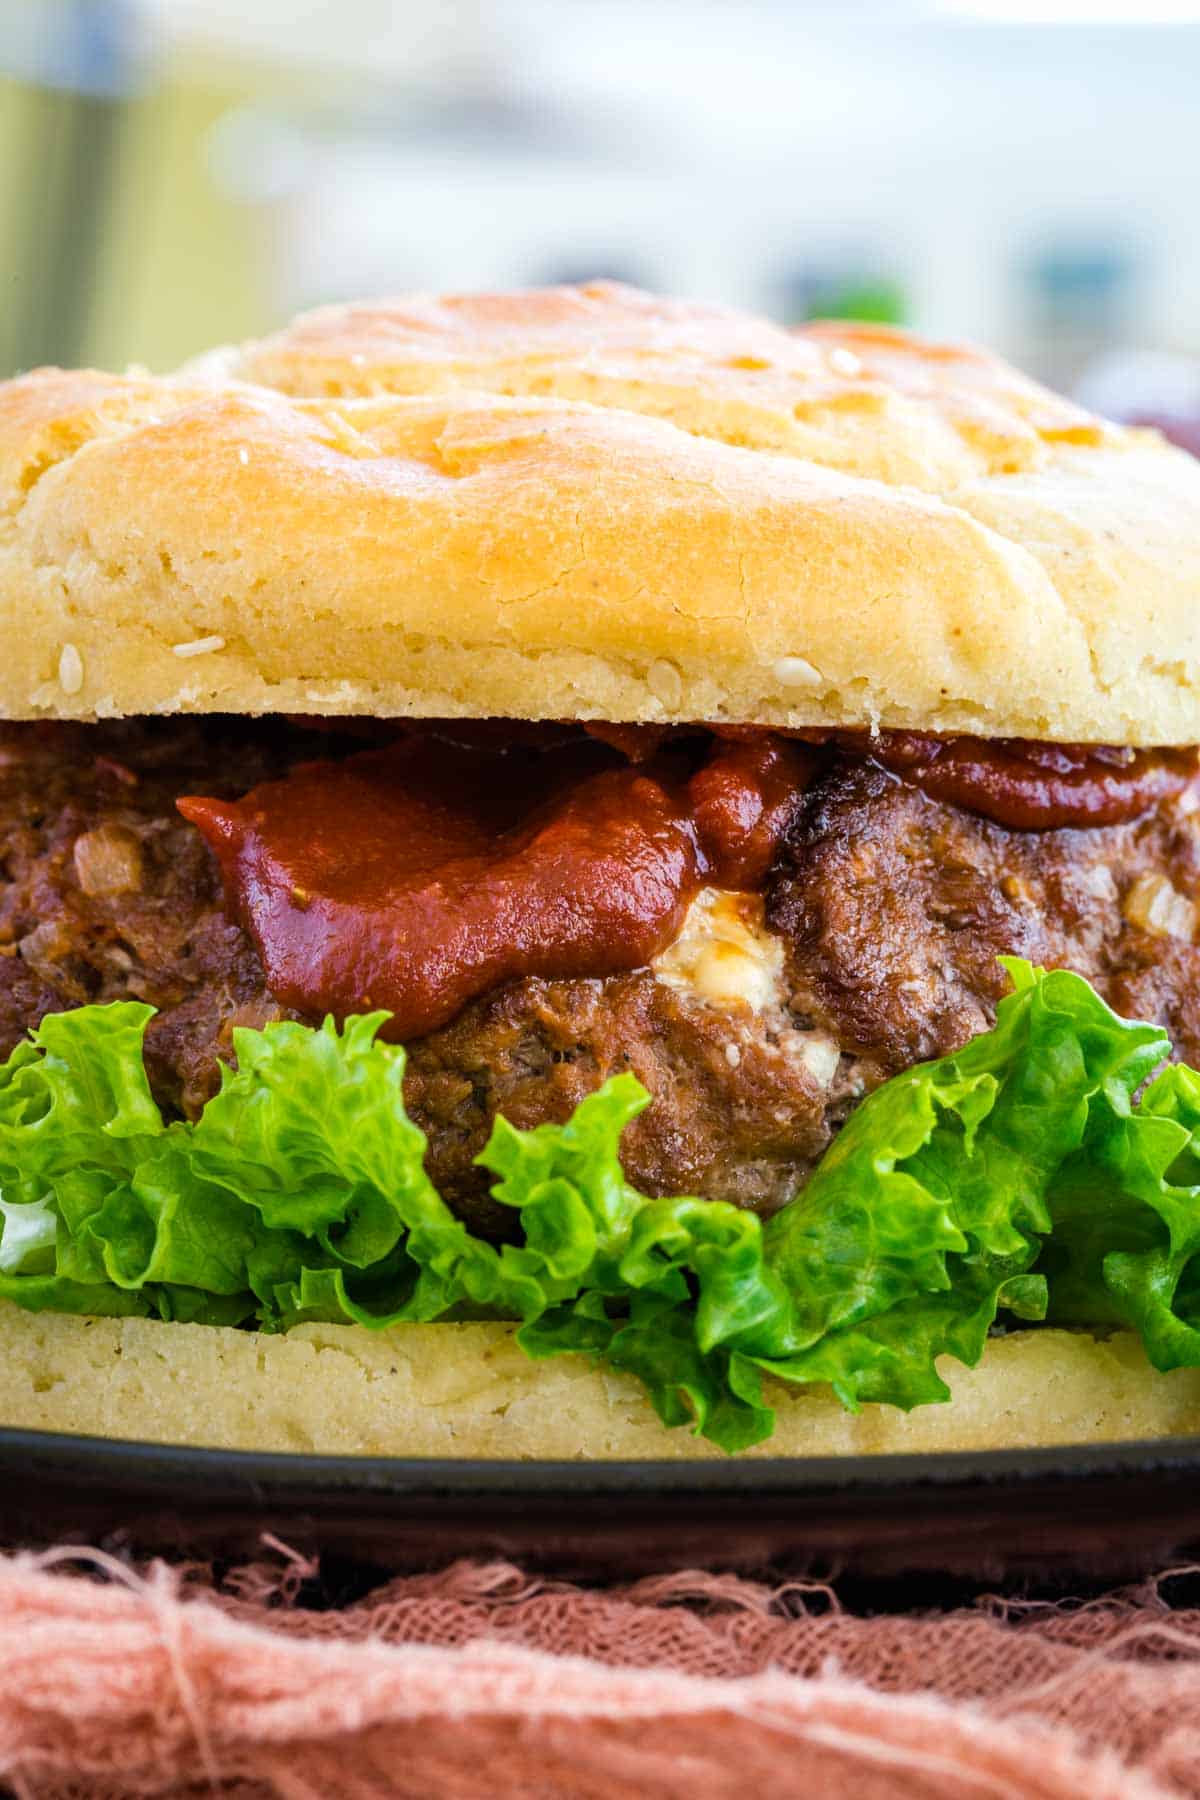 Closeup of a cooked cheese stuffed burger.